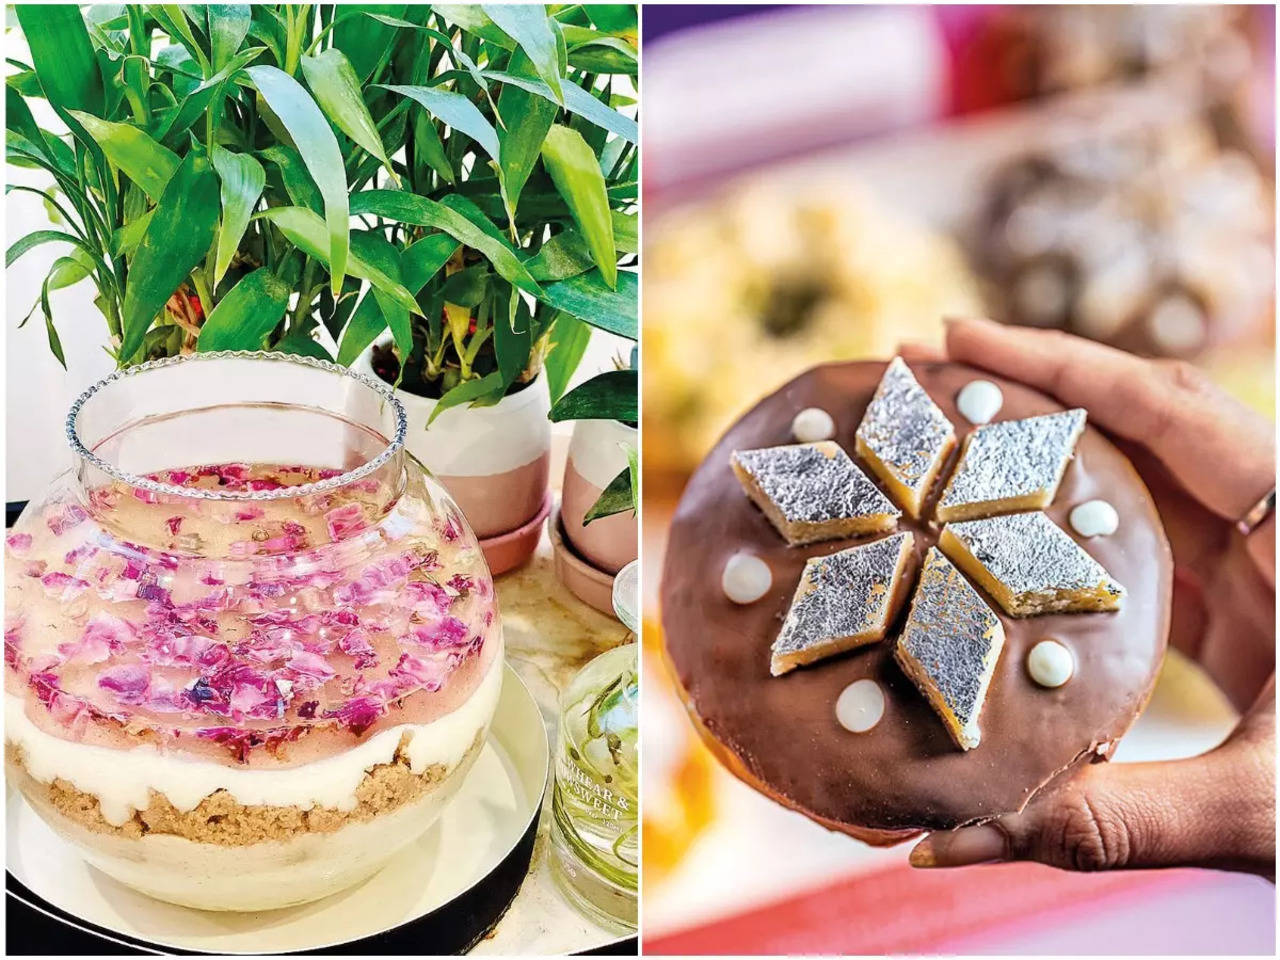 Diwali Hampers to Order From 10 Home Bakers in Bangalore - 2022 | Hotels,  Restaurants, Destinations & things to do - StayEatSee